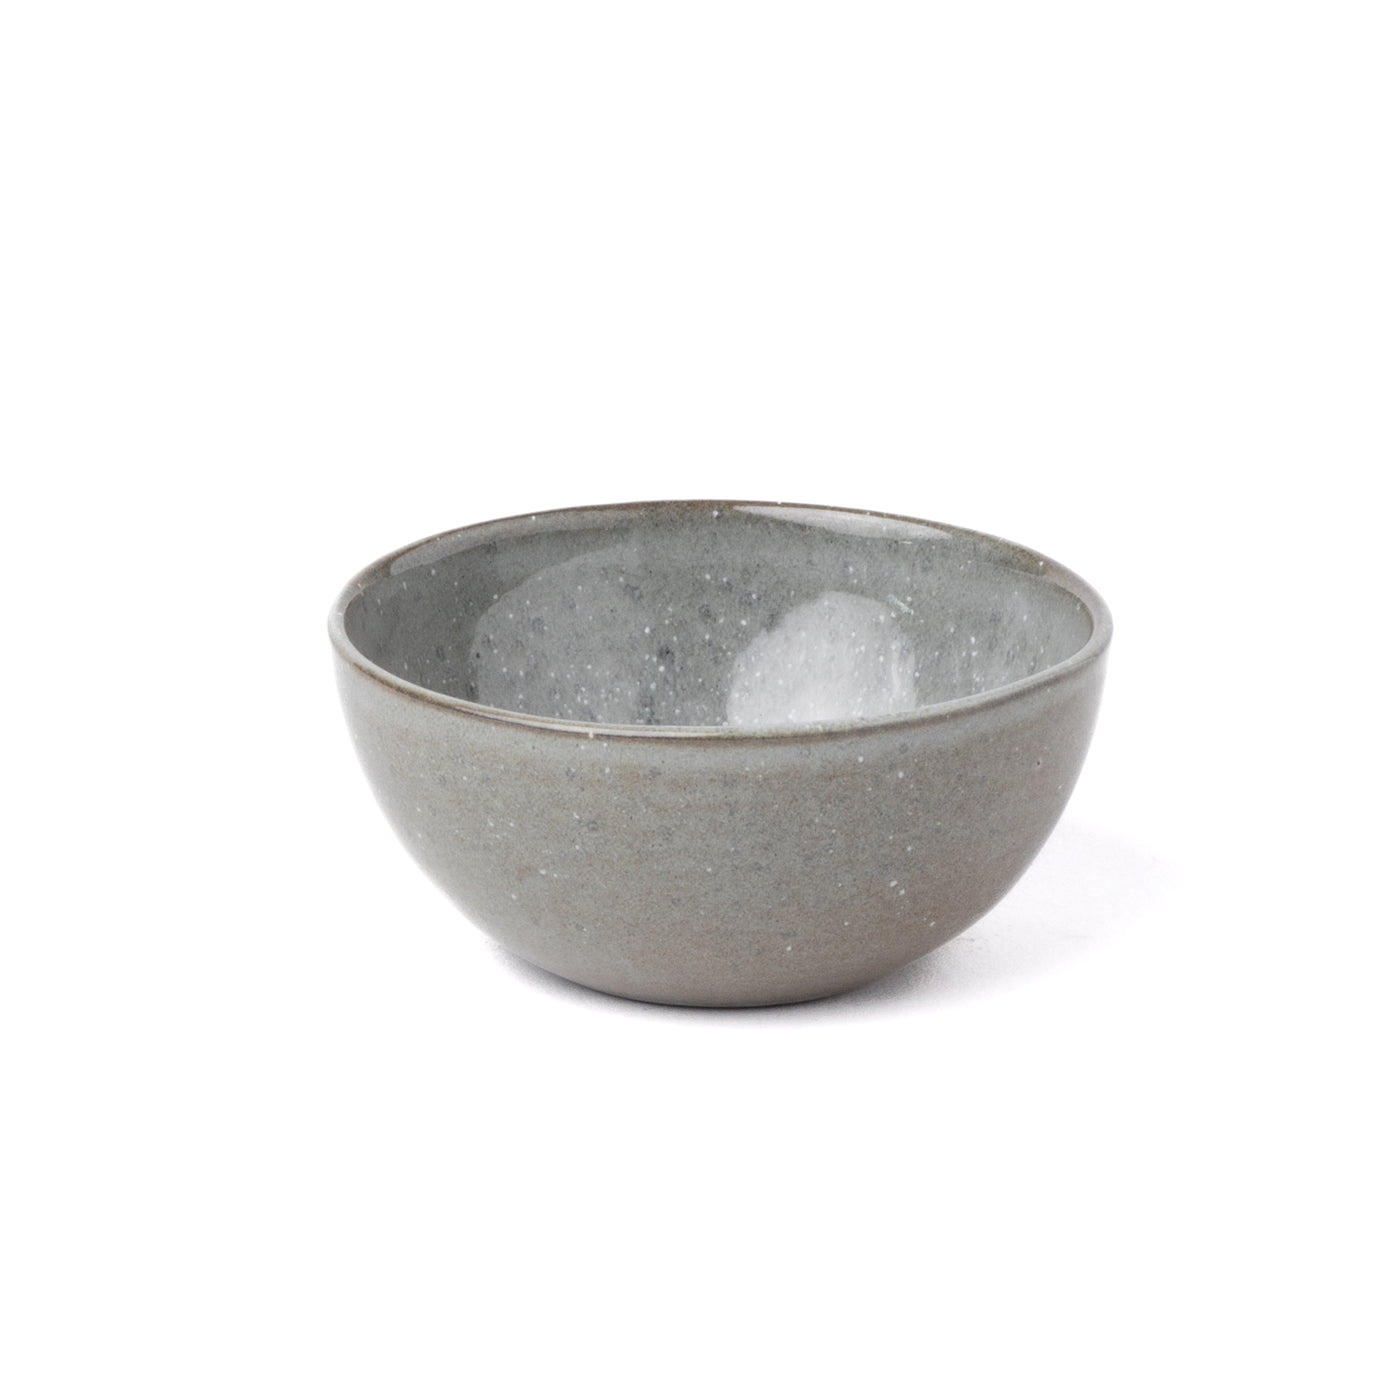 Small Dip Bowl Snackbowl for Sauces Nuts Grey Blue Green Reactive Glaze